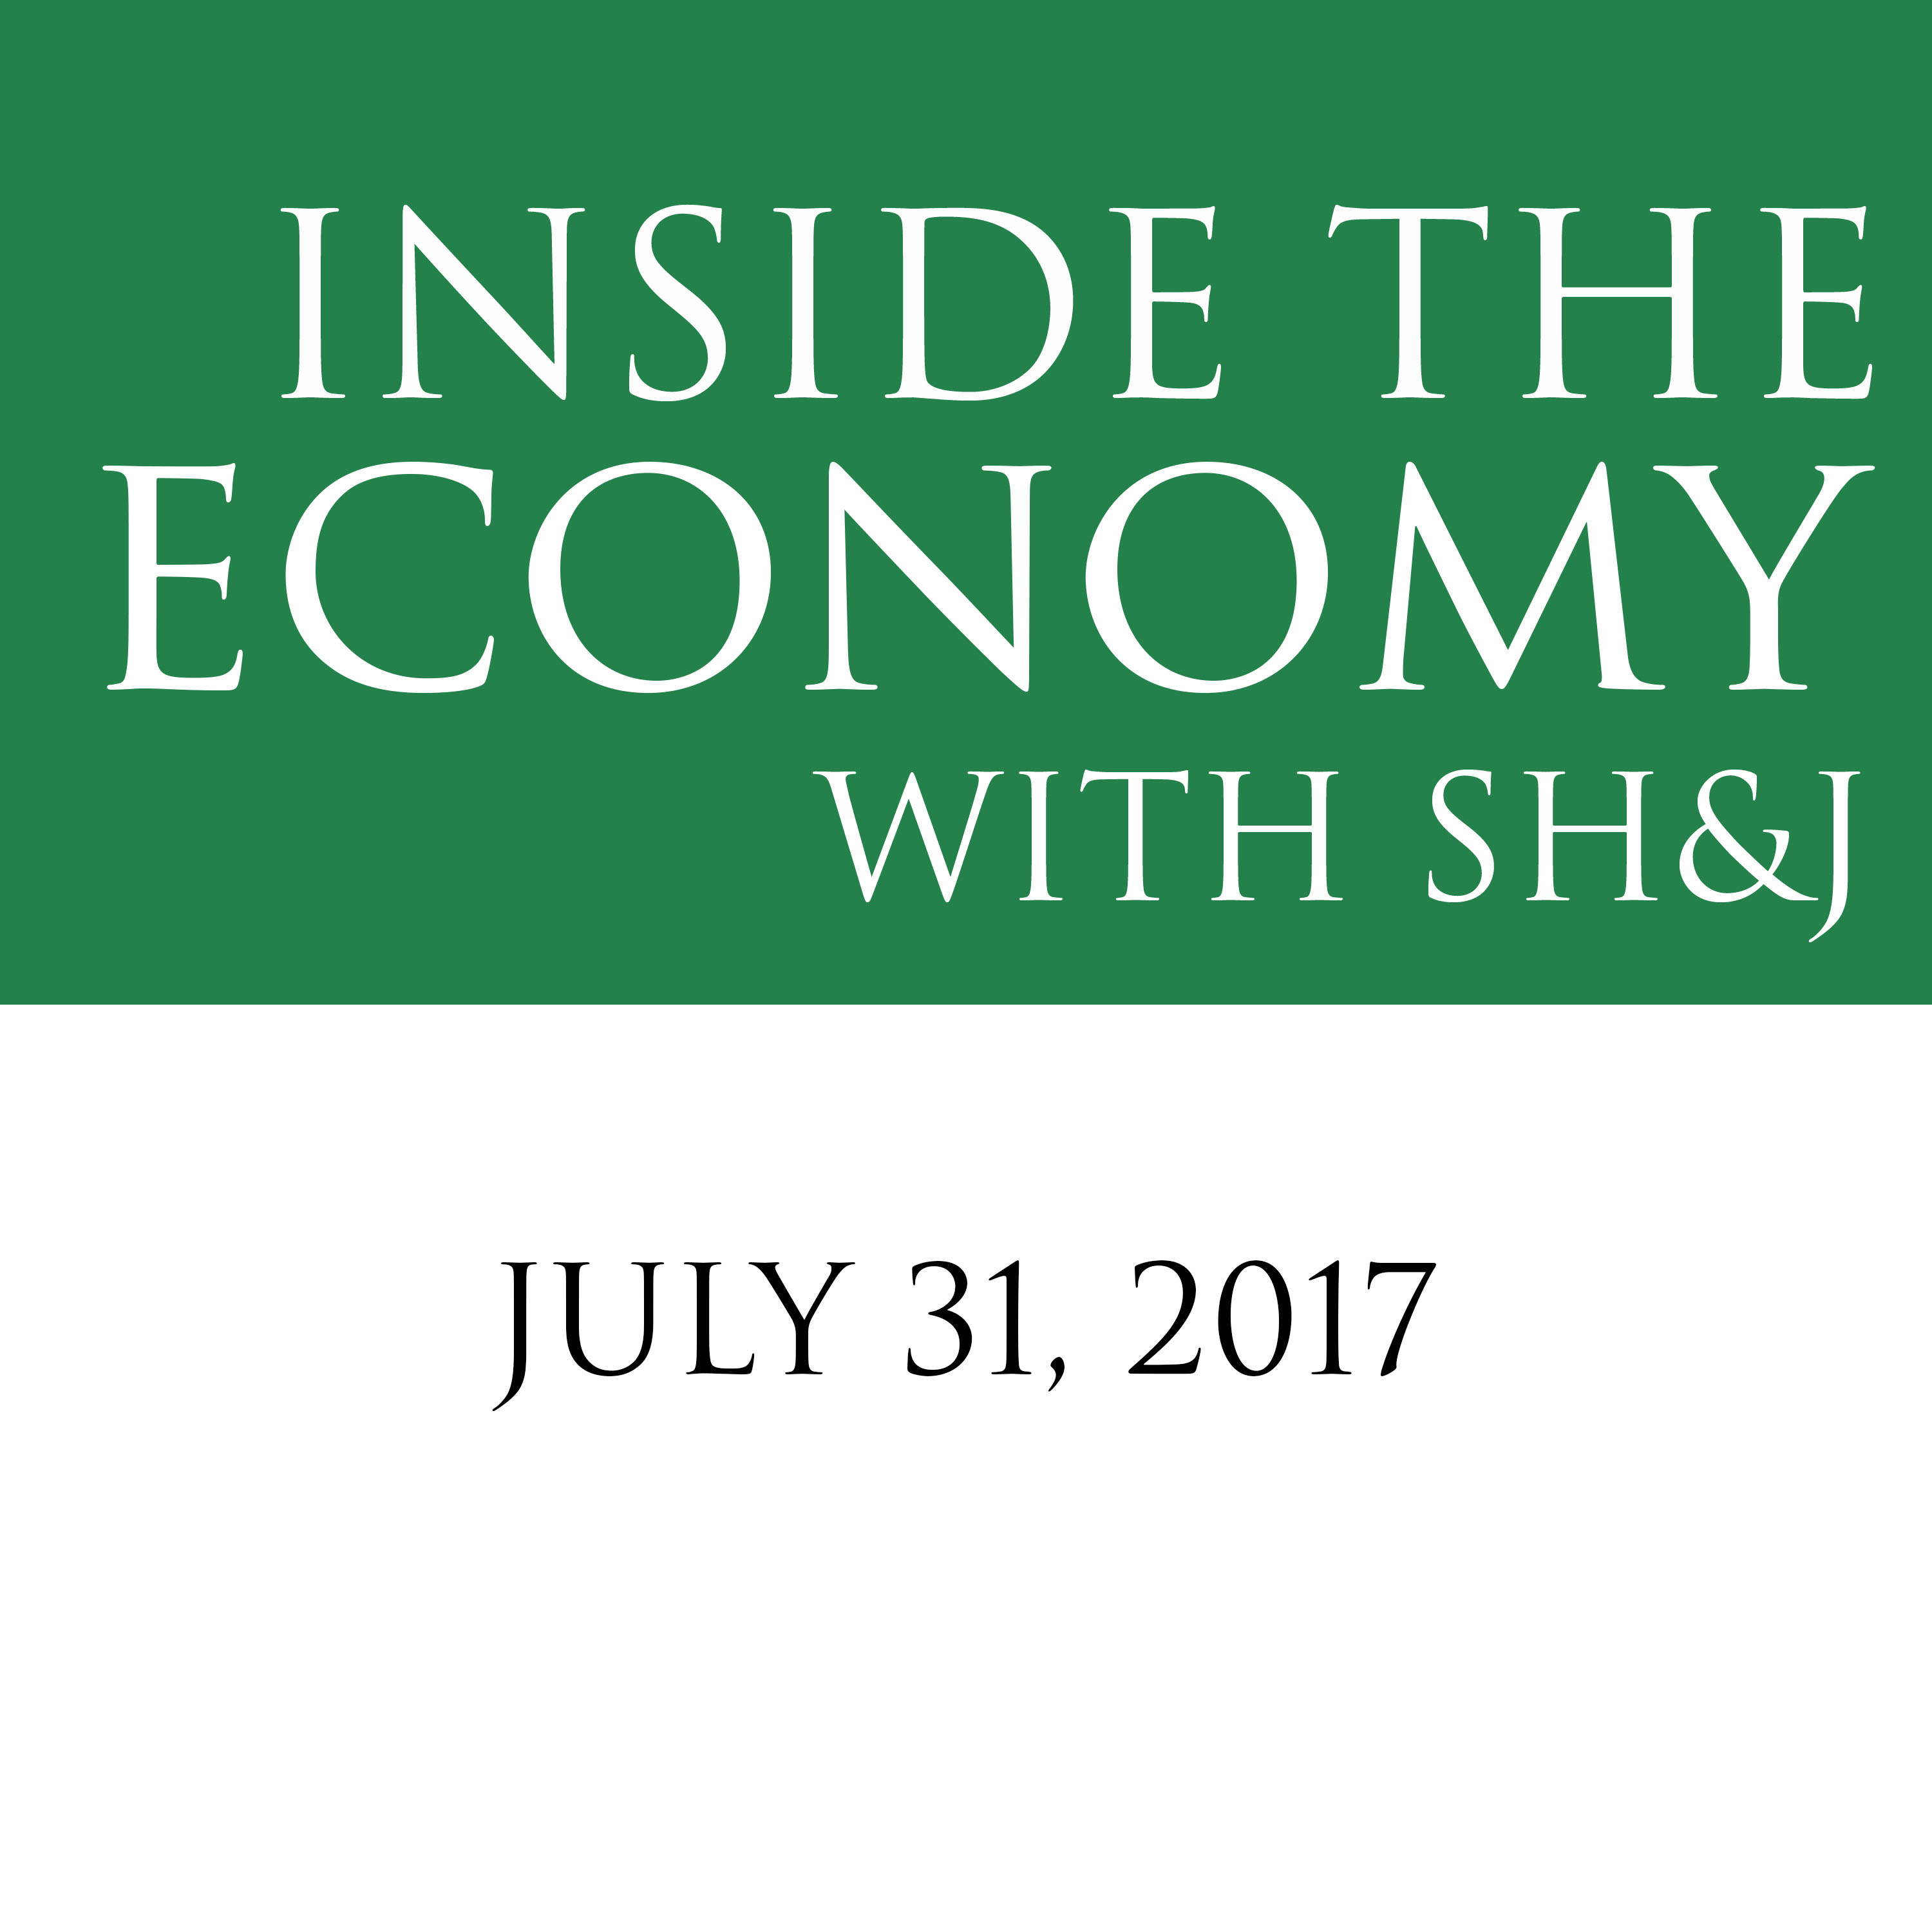 Inside the Economy with SH&J: Housing Market, GDP, the U.S. Shale Oil Industry, and More!